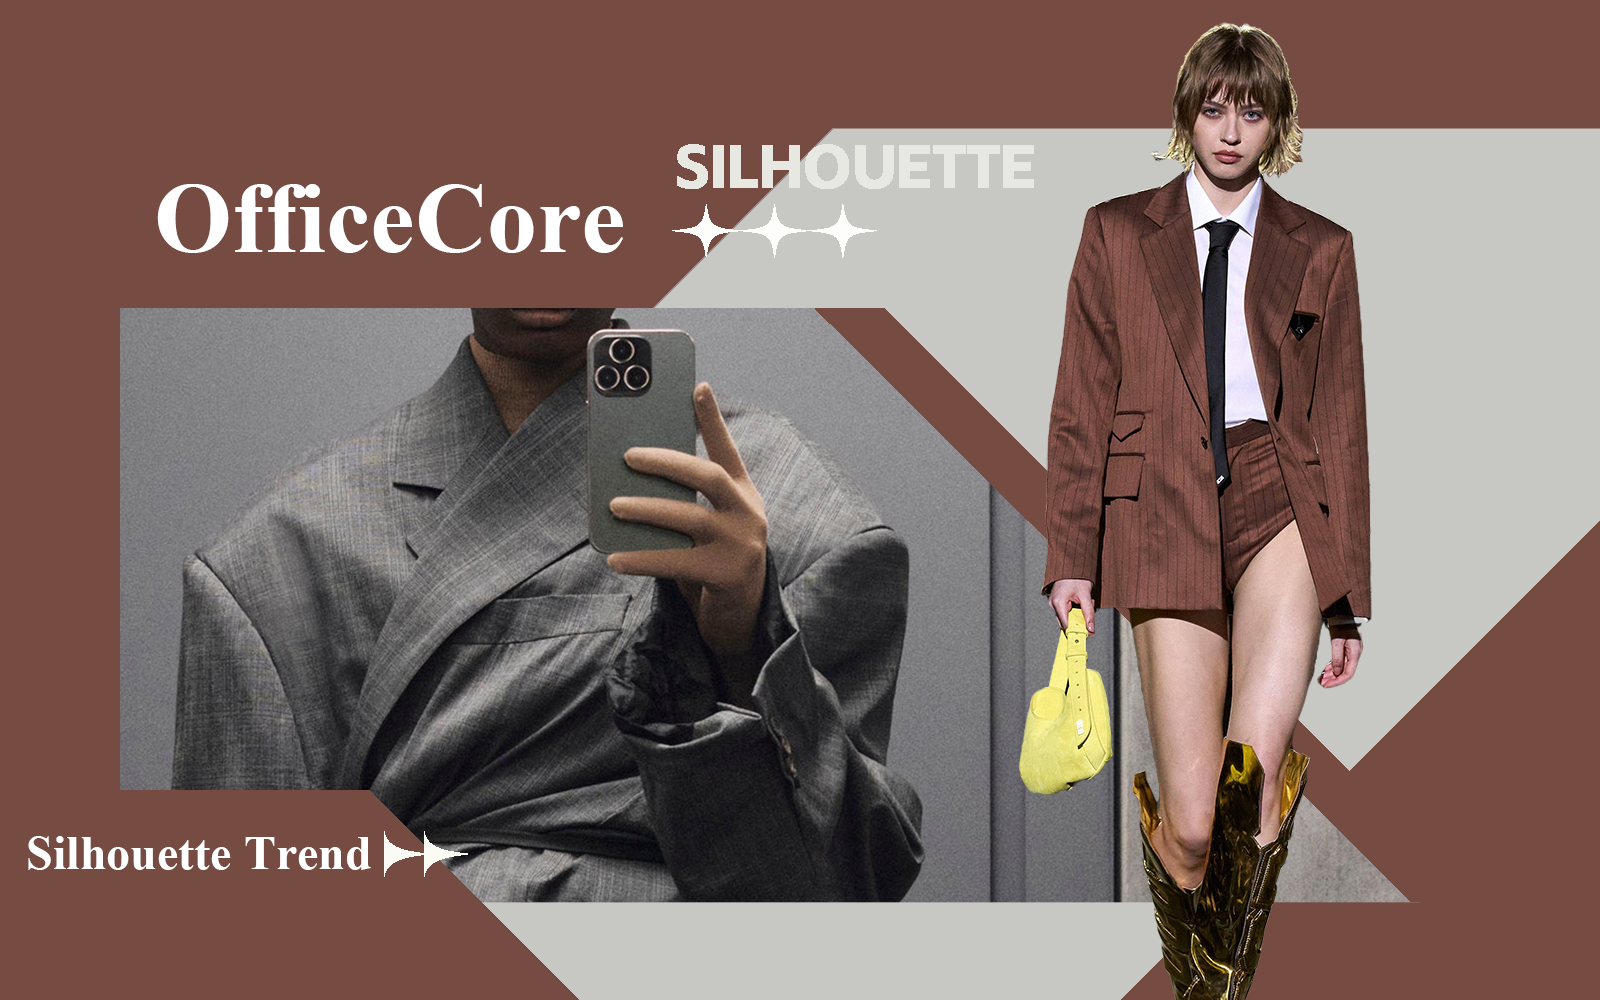 OfficeCore -- The Silhouette Trend for Womenswear